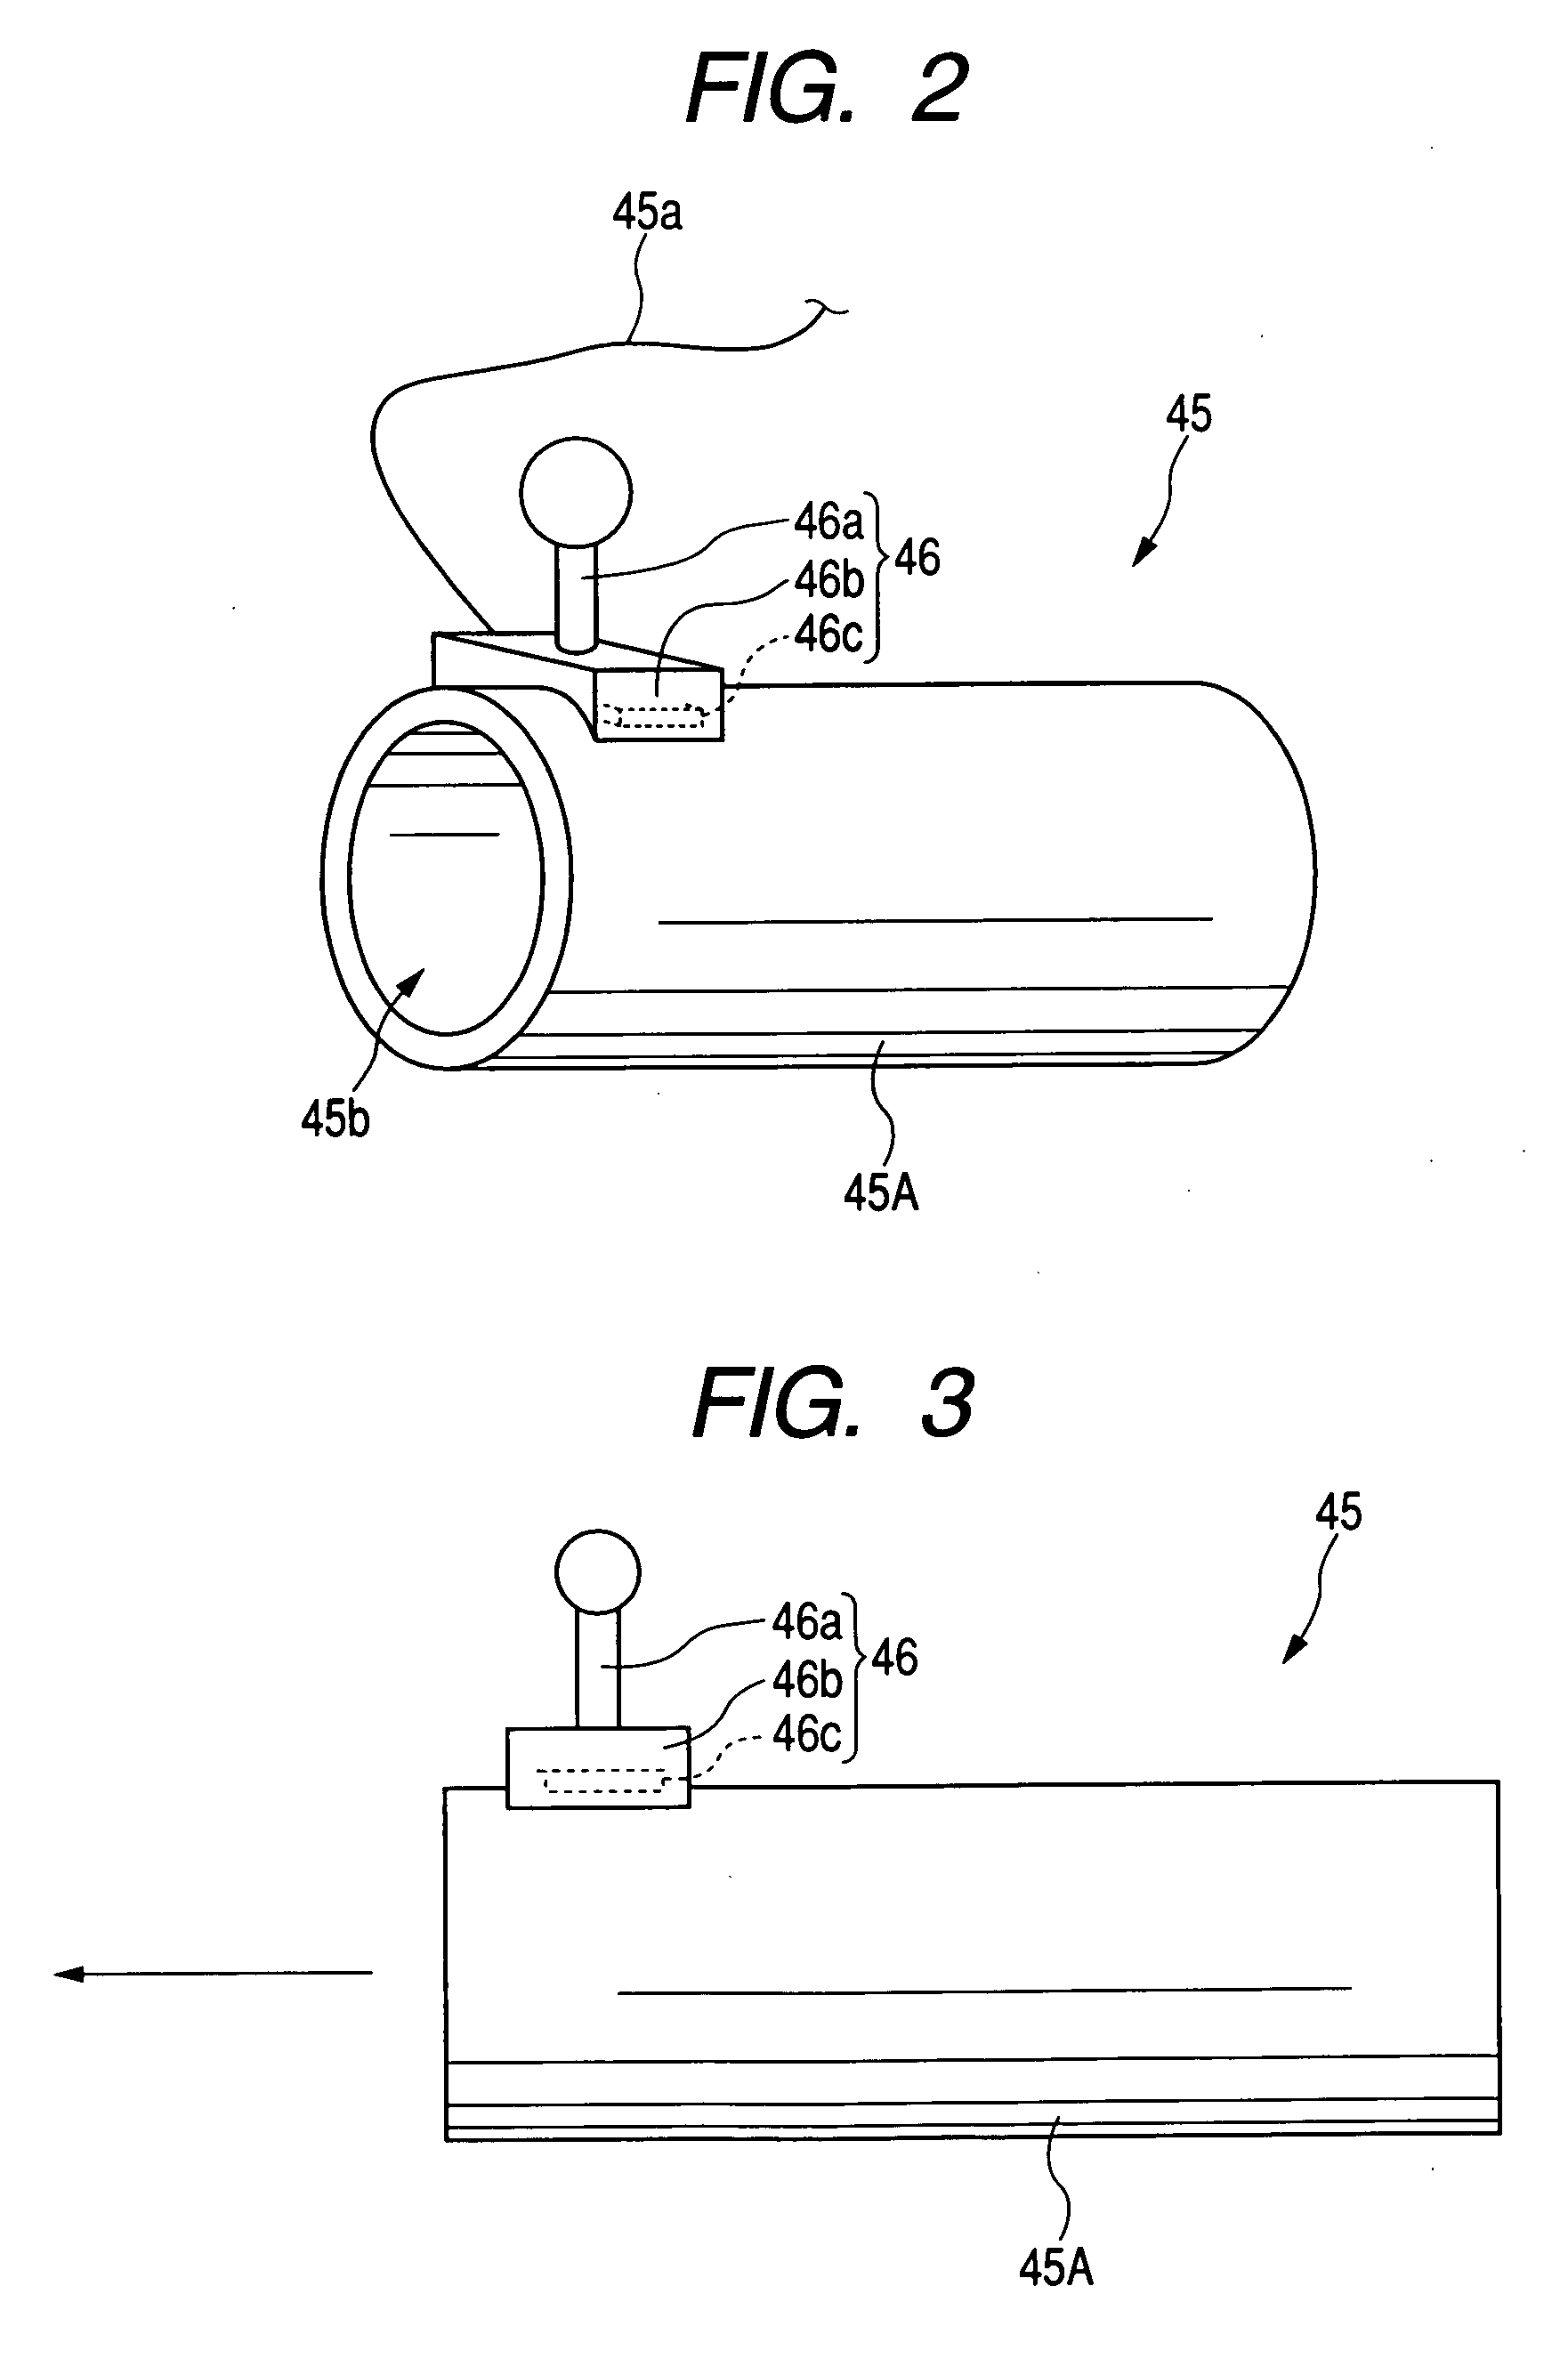 Endoscope system equipped with manipulating unit for commanding medical therapy to endoscope and medical instrument attached thereto